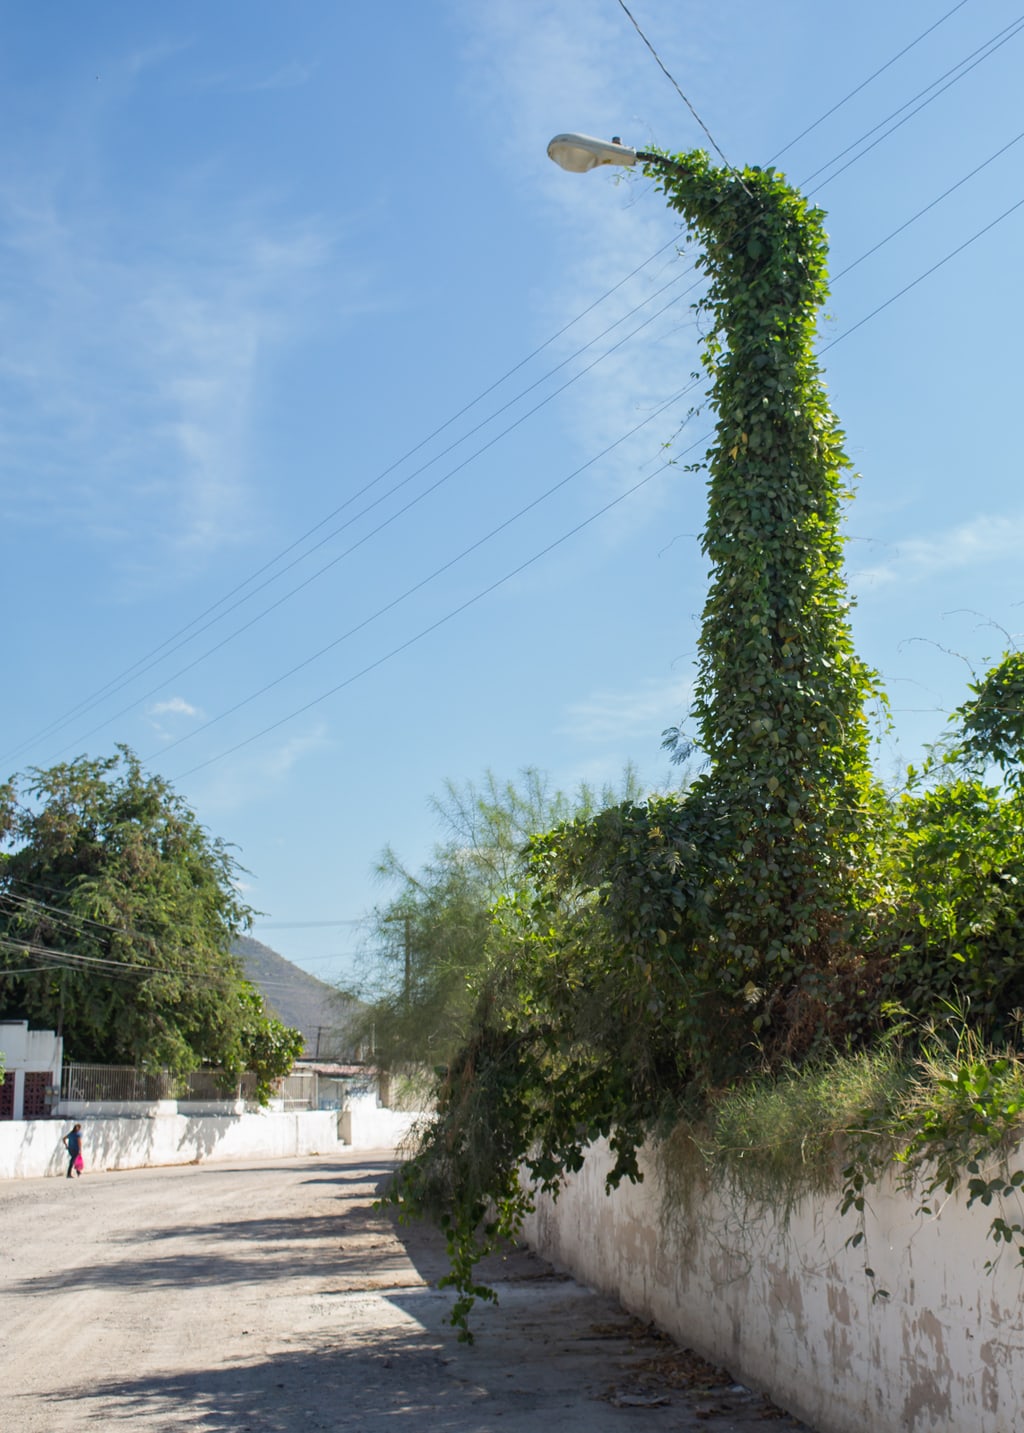 A street lamp covered with vines in La Paz, Mexico